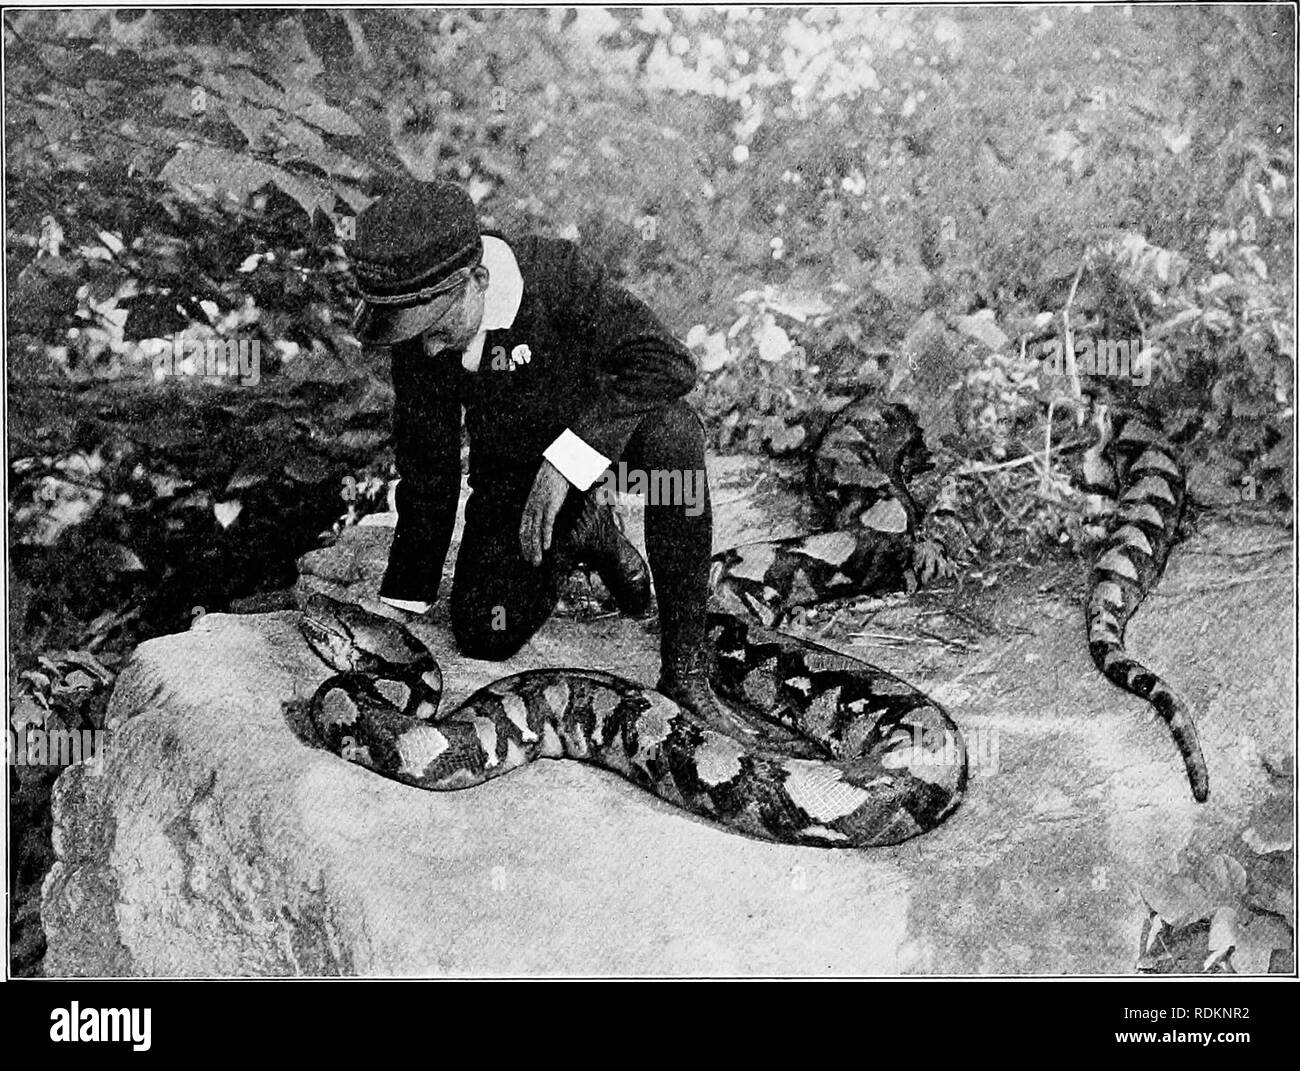 . The American natural history : a foundation of useful knowledge of the higher animals of North America . Natural history. TWENTY-TWO-FOOT RETICULATED PYTHON (DEAD) . New York Zoological Park. CHAPTER XXXIX THE ORDER OF SERPENTS General Characters.—A serpent, commonly called a &quot;snake,&quot; is a very slender, long-bodied, legless reptile, cold-blooded, covered with scales, and breathing air. It moves by a sinuous mo- tion, in which the scales under the body grip the earth, while the extension of the body musclss push the body forward. To afford a good hold upon the earth, the abdominal s Stock Photo